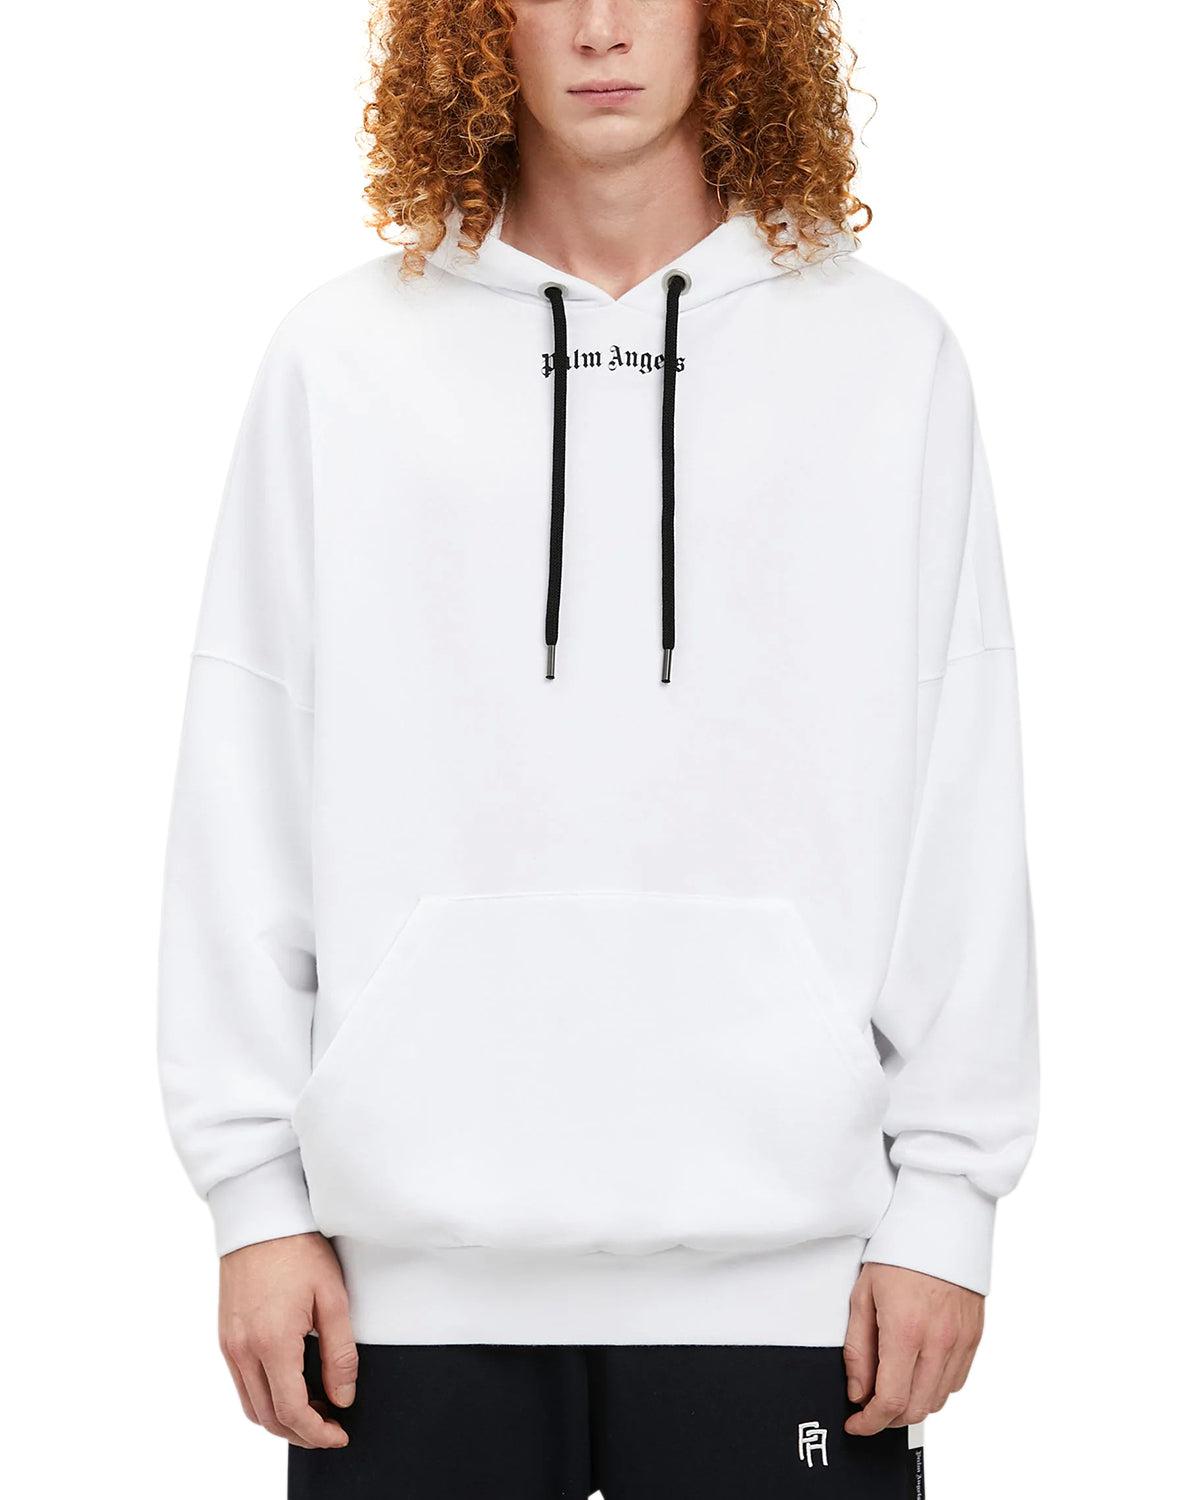 PALM ANGELS MENS CLASSIC LOGO OVER HOODIE WHITE